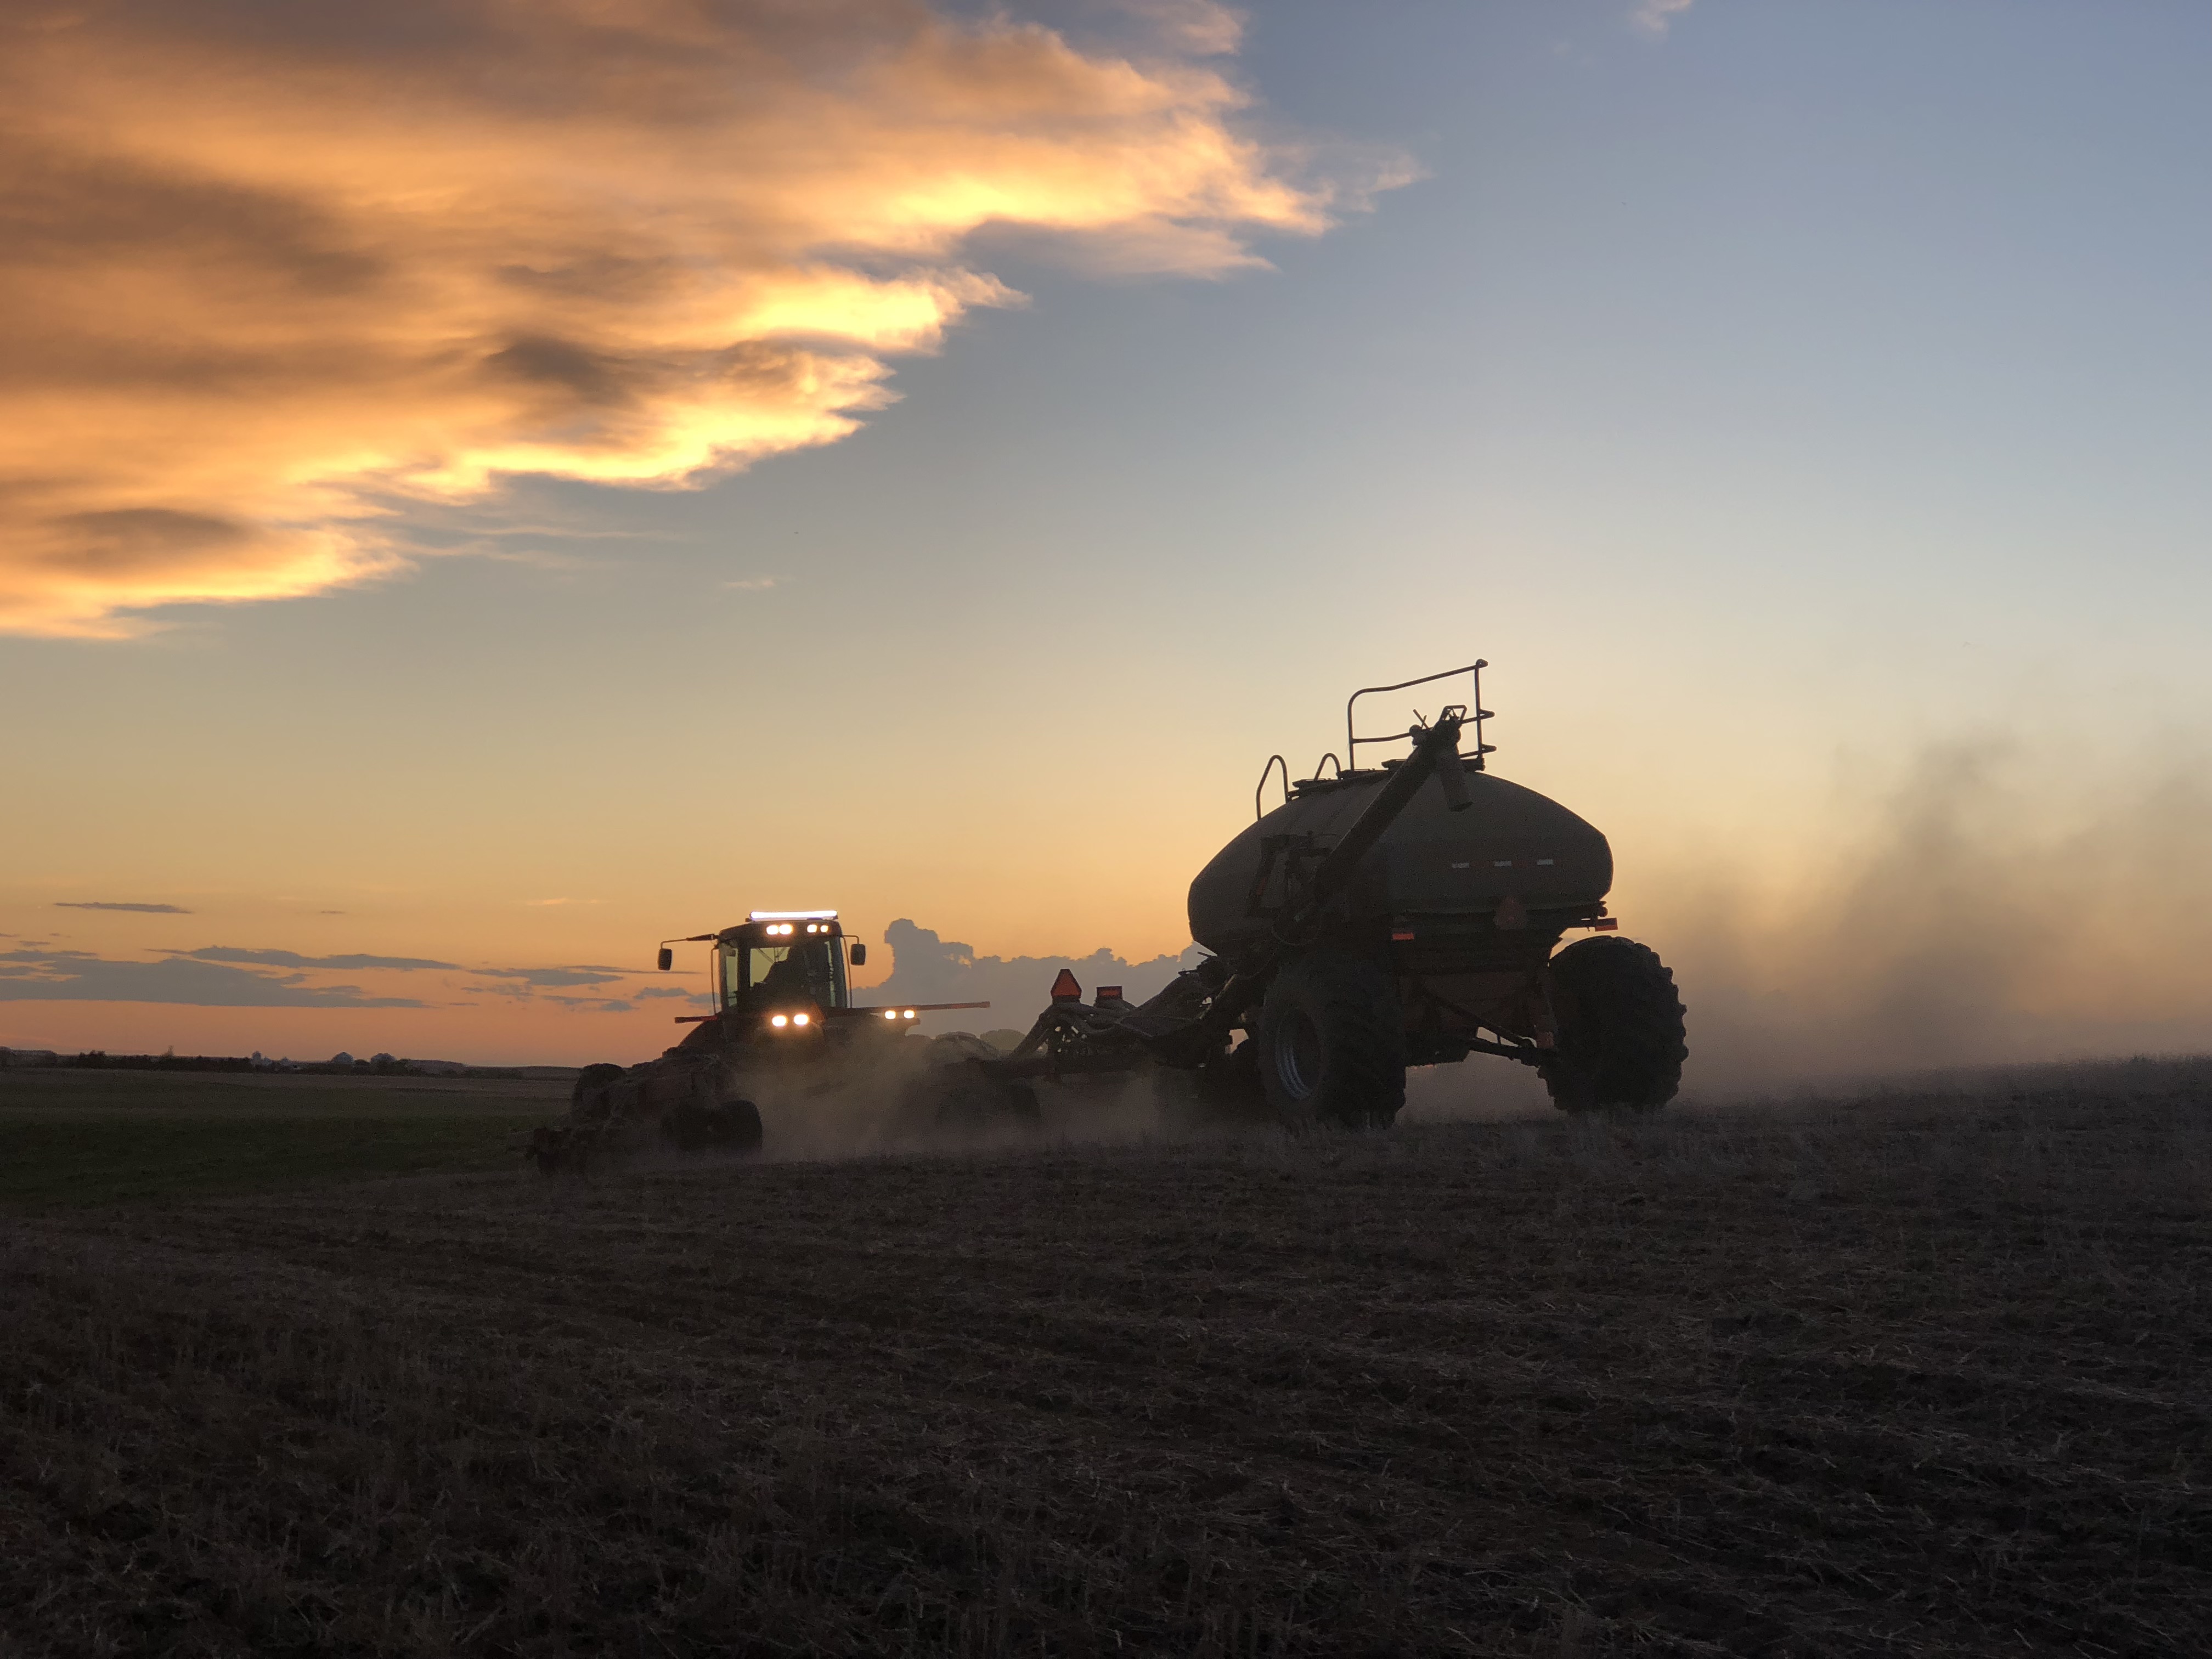 How Producing More with Less Will Drive the Future of Agriculture - an article from AEM